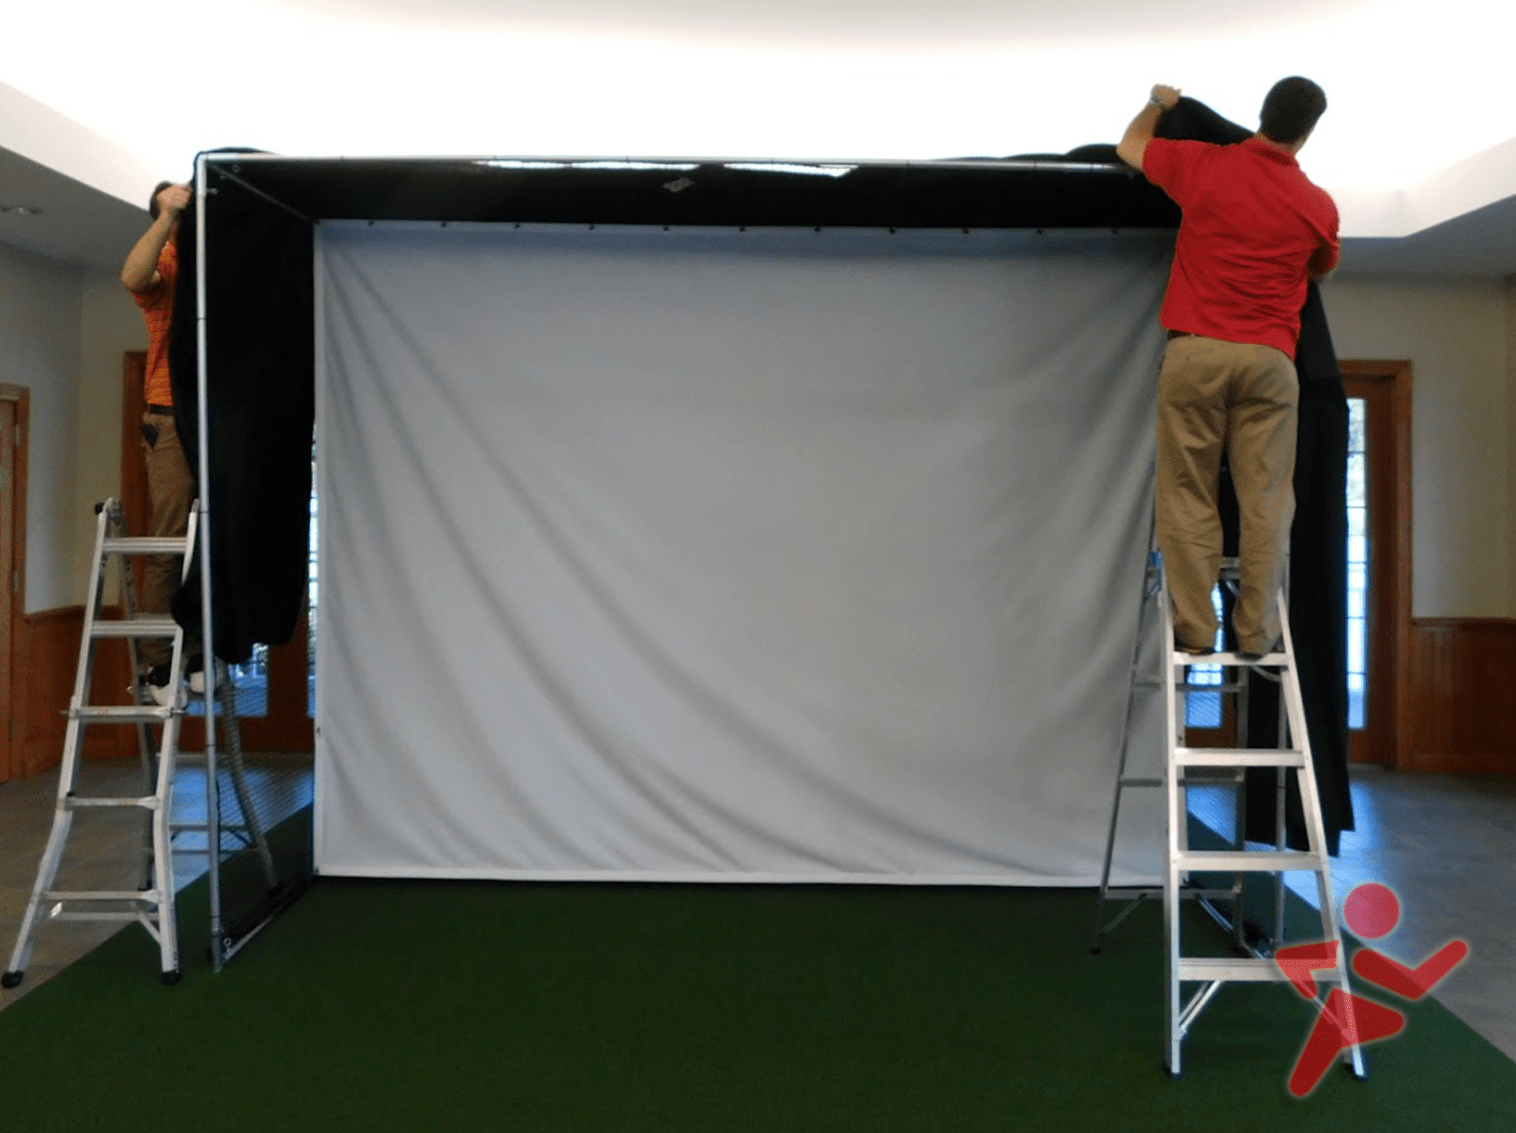 Golf Simulator Installation Services in the Southeast and Midwest USA